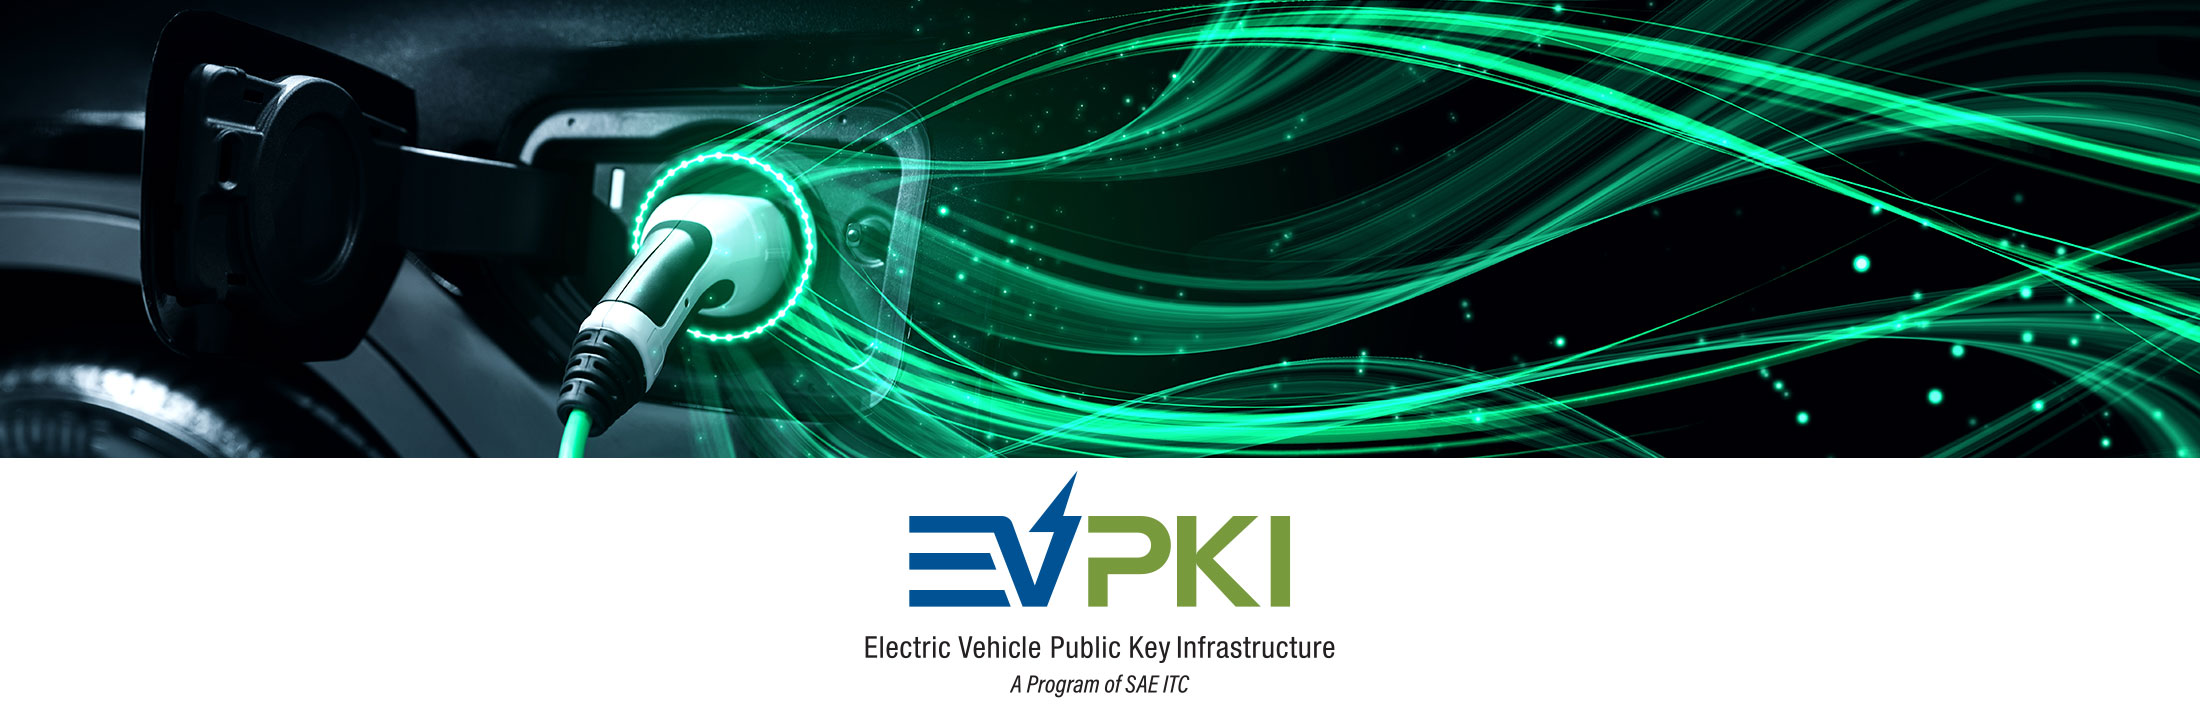 The EVPKI solution will establish the necessary user and regulatory trust to further accelerate EV adoption - Fabian Koark, COO, SAE Industry Technology Consortia